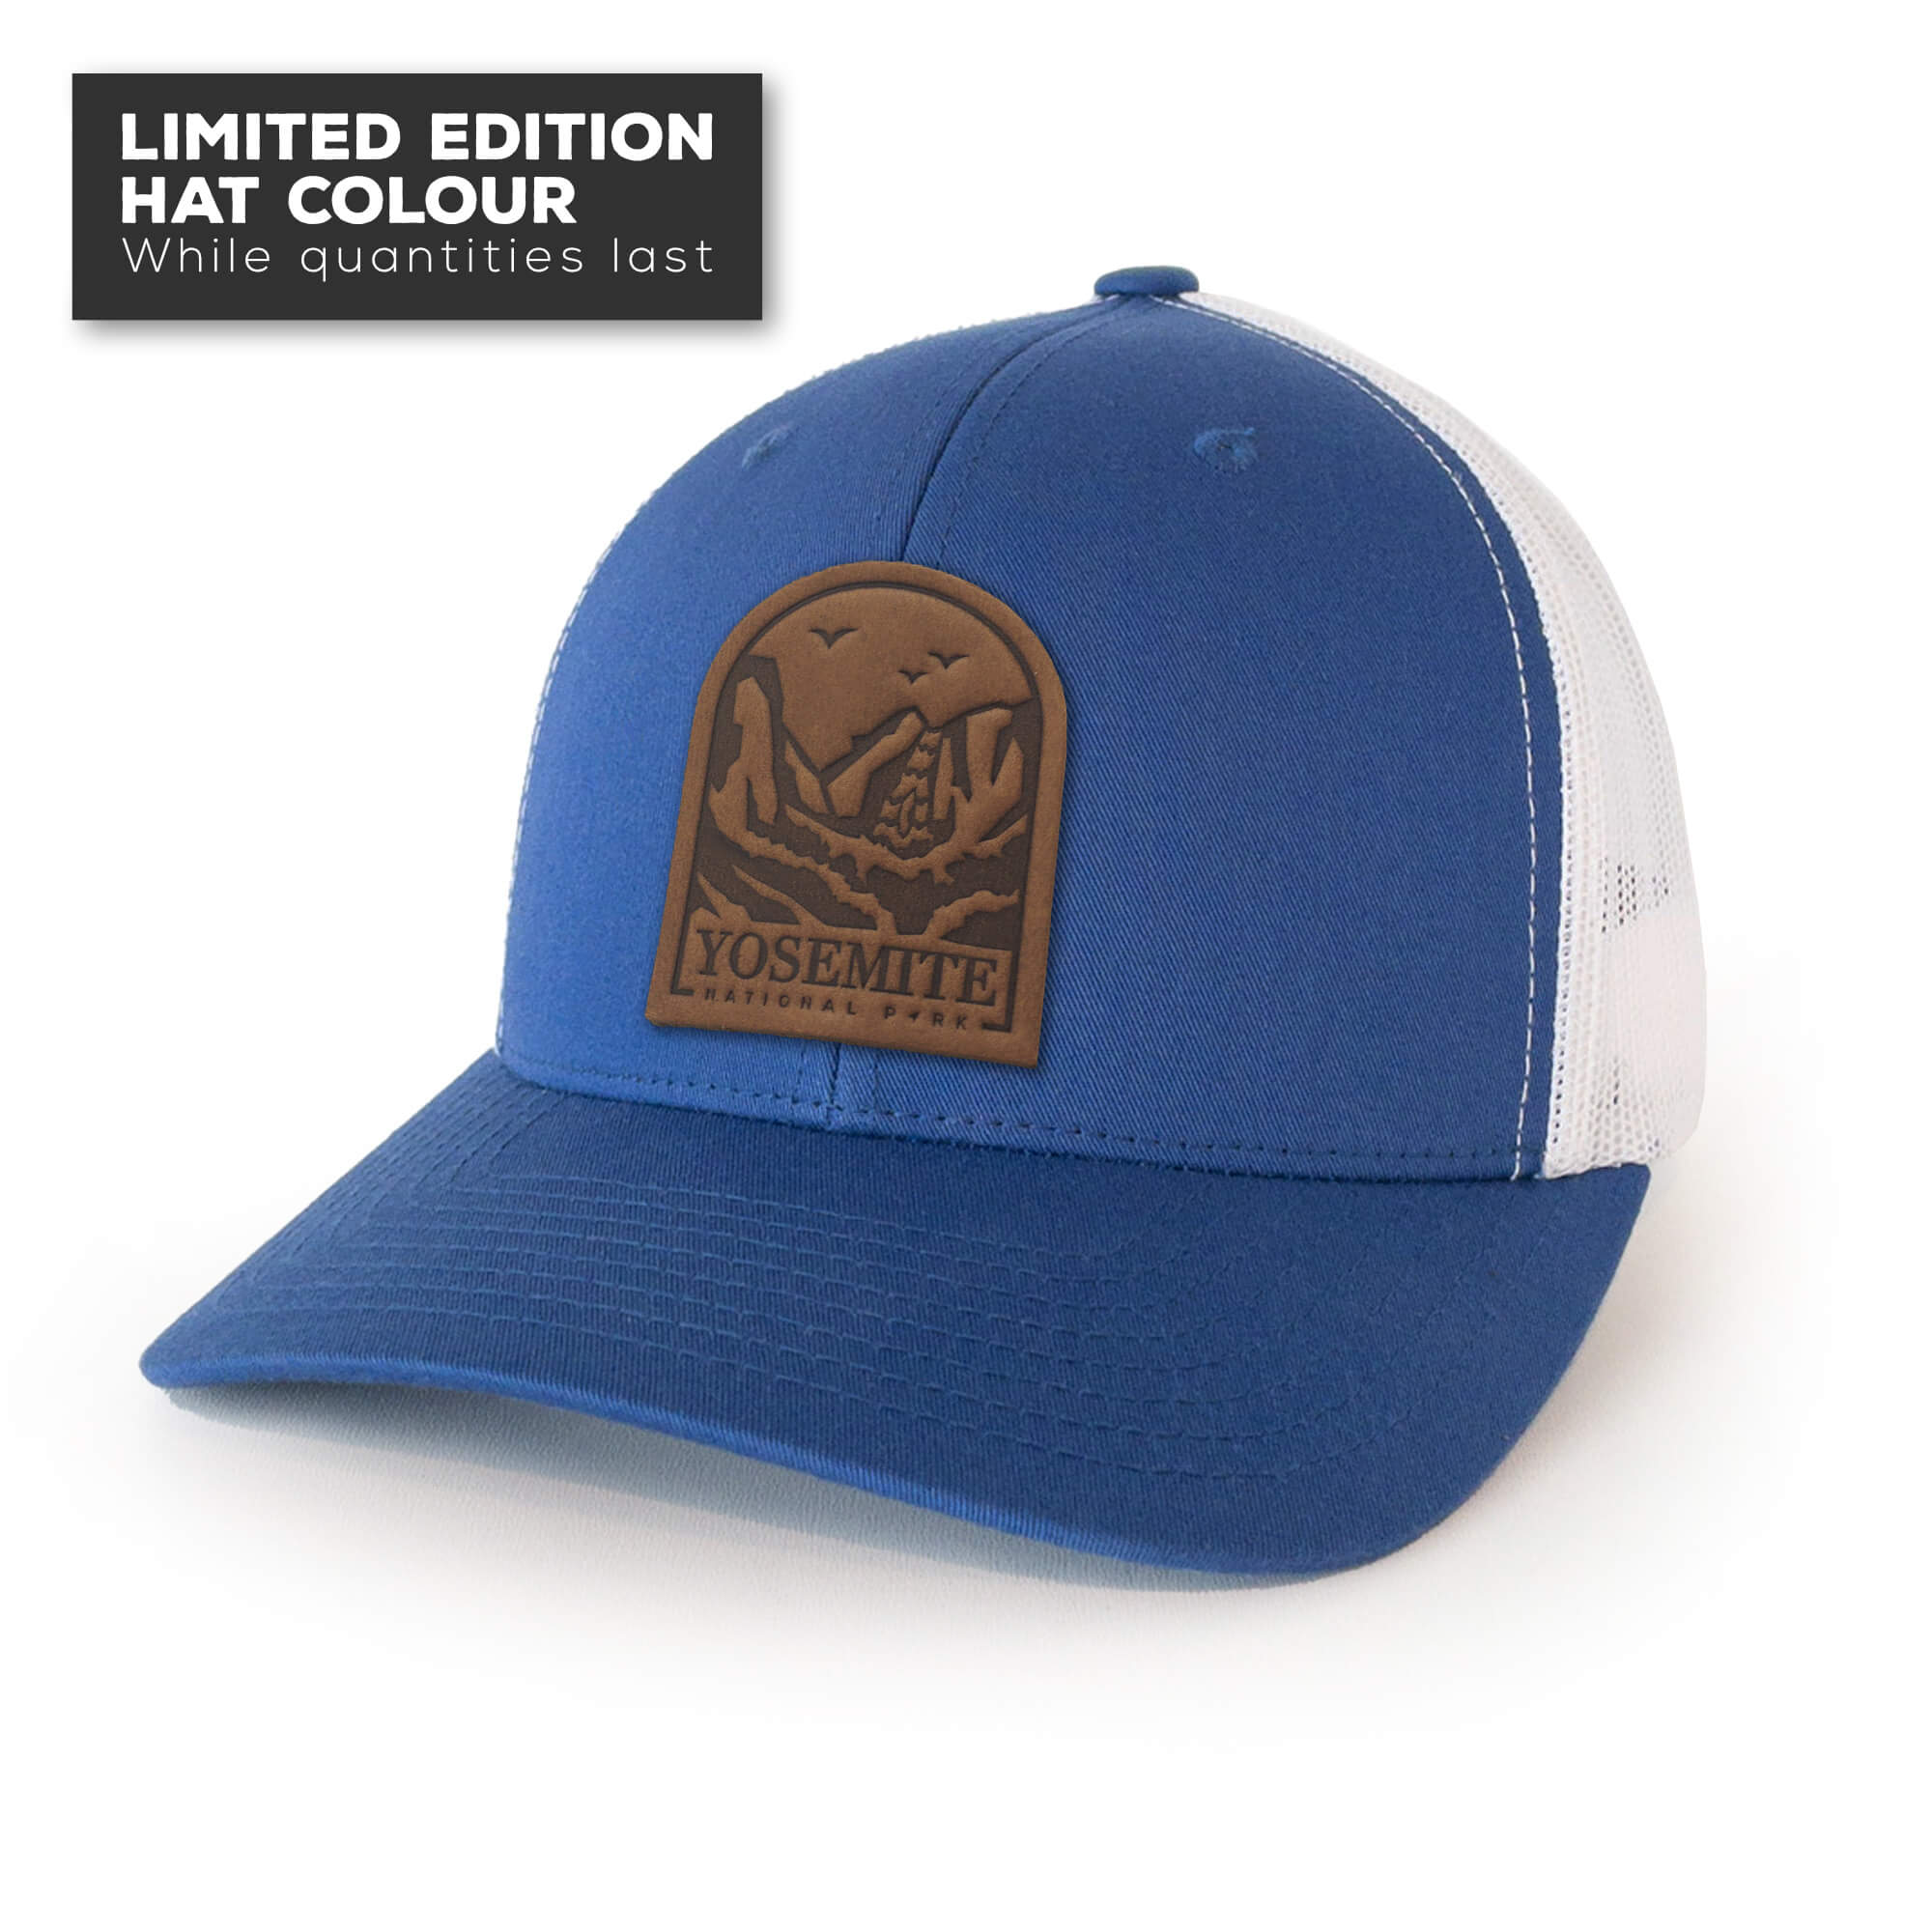 Royal Blue trucker hat with full-grain leather patch of Yosemite